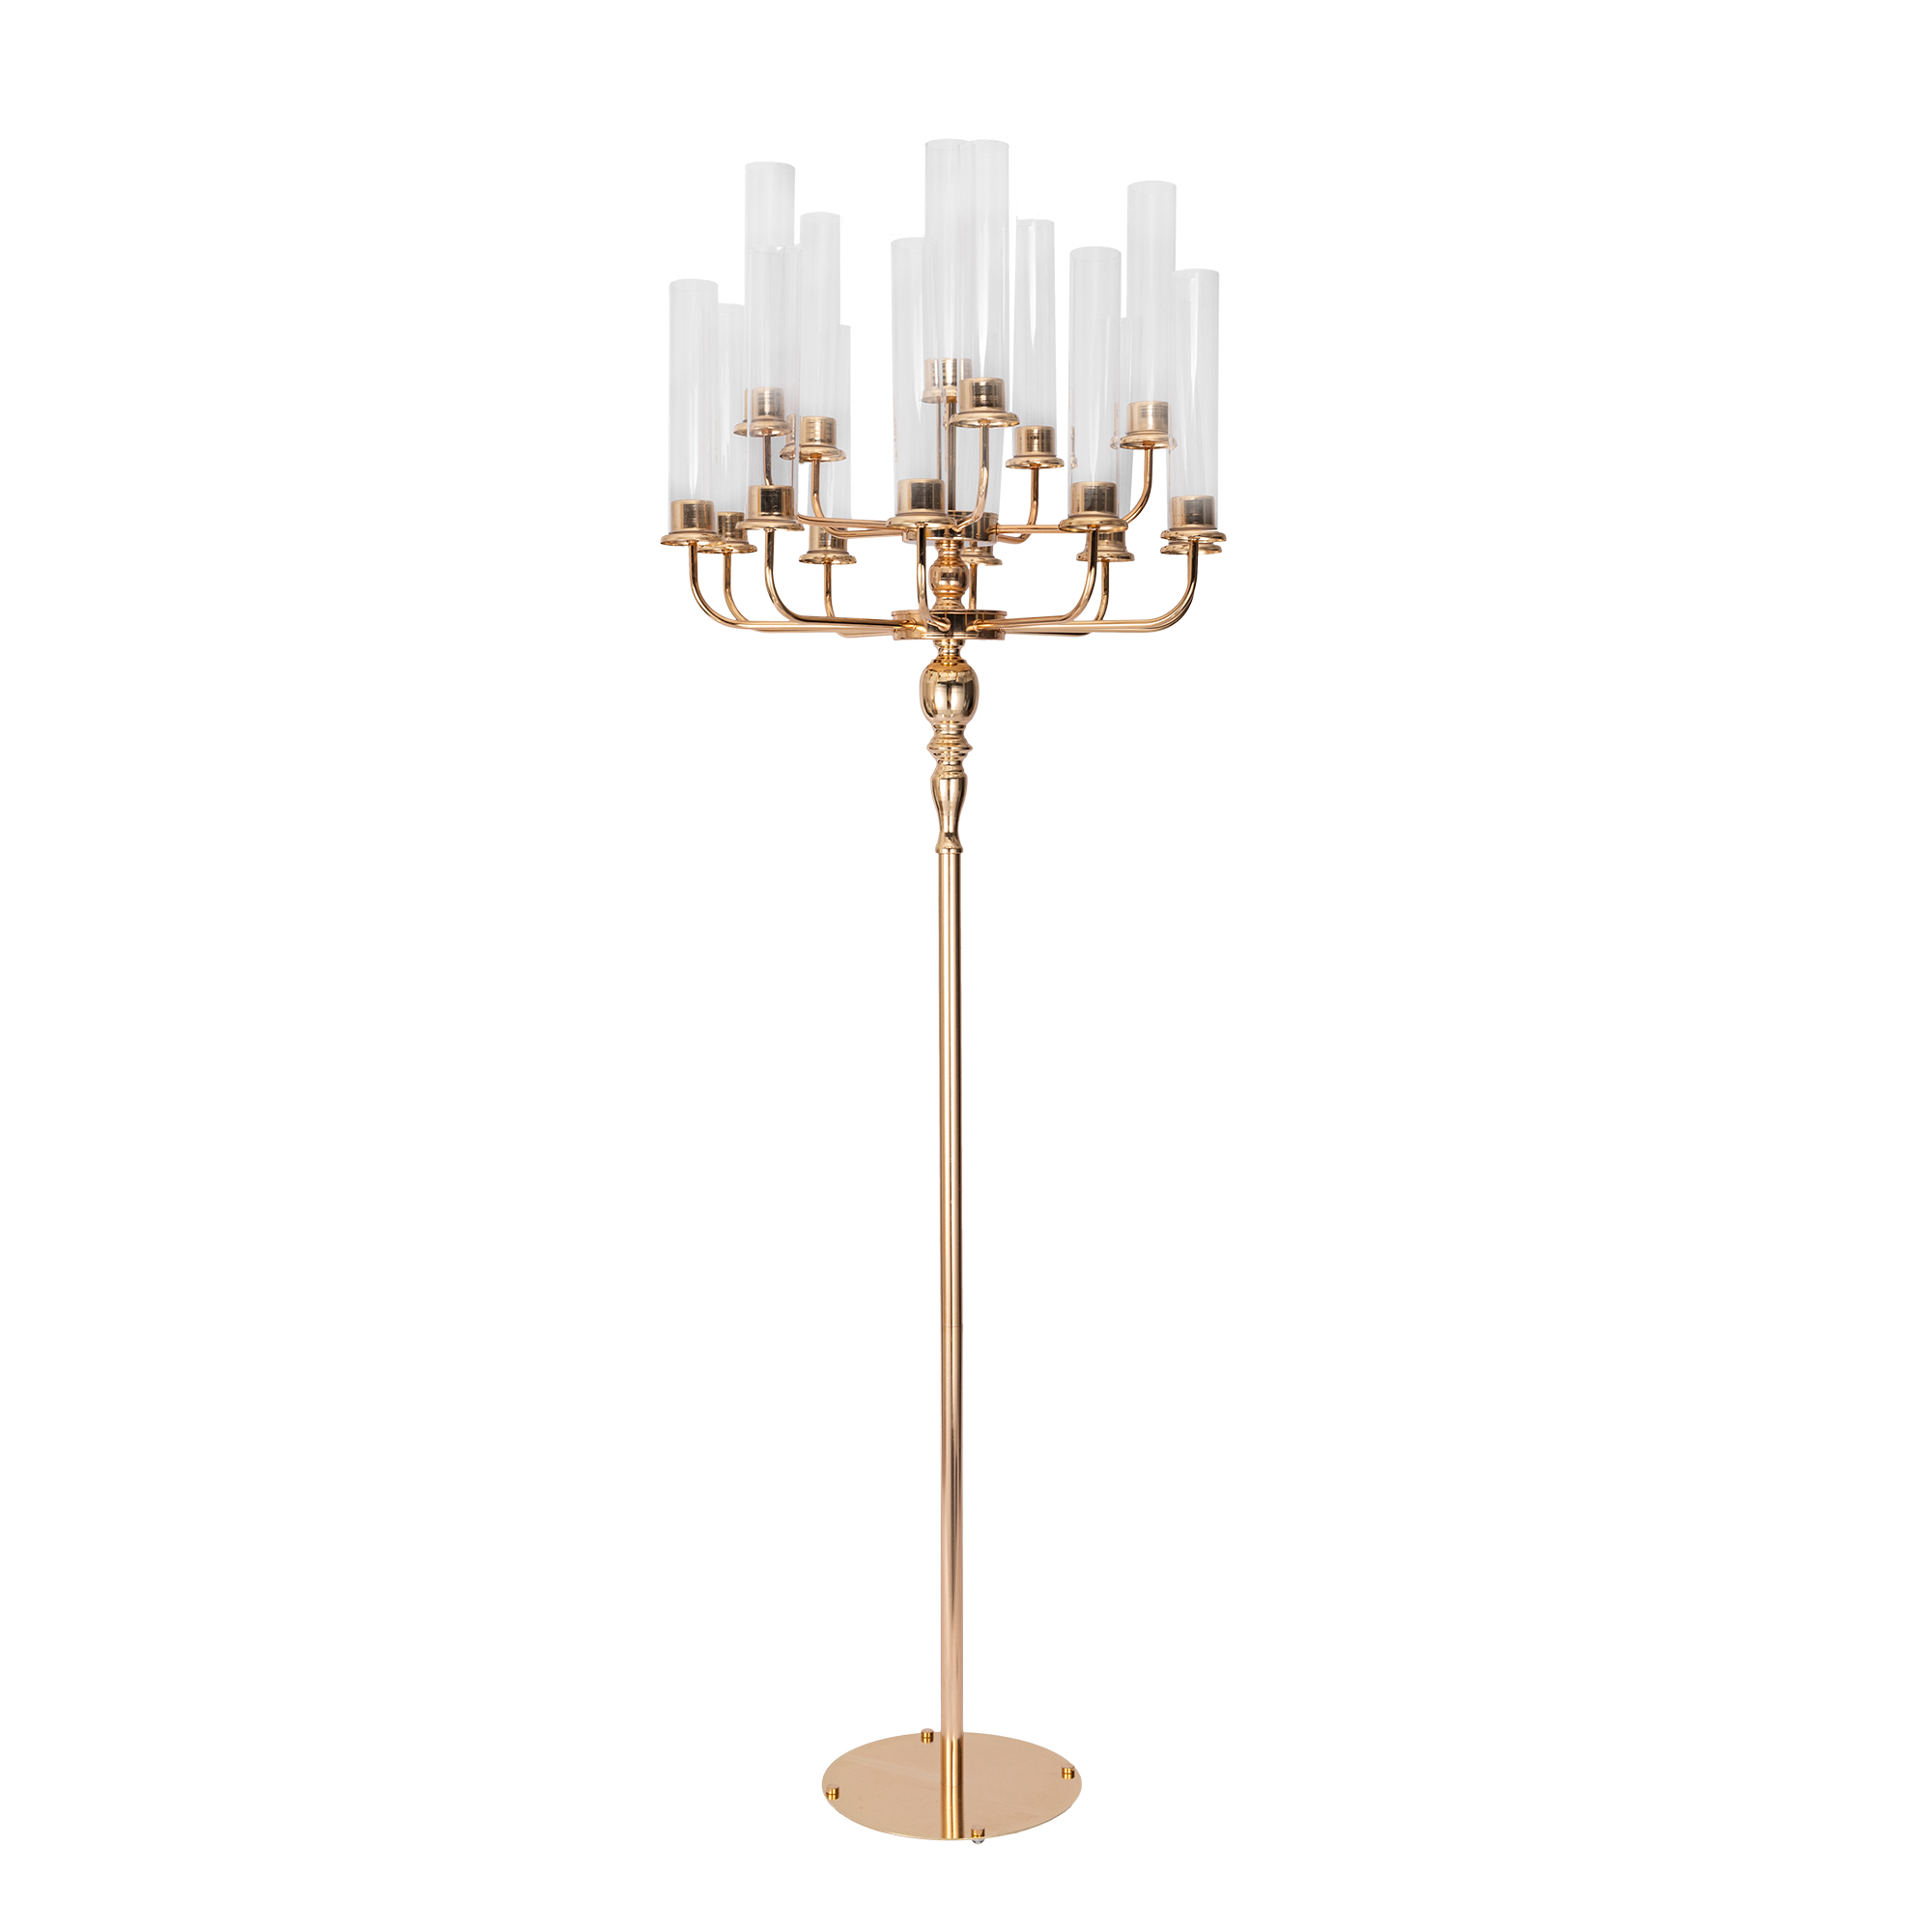 16 Head Candle Holder with Cylinder Shade 68" - Gold